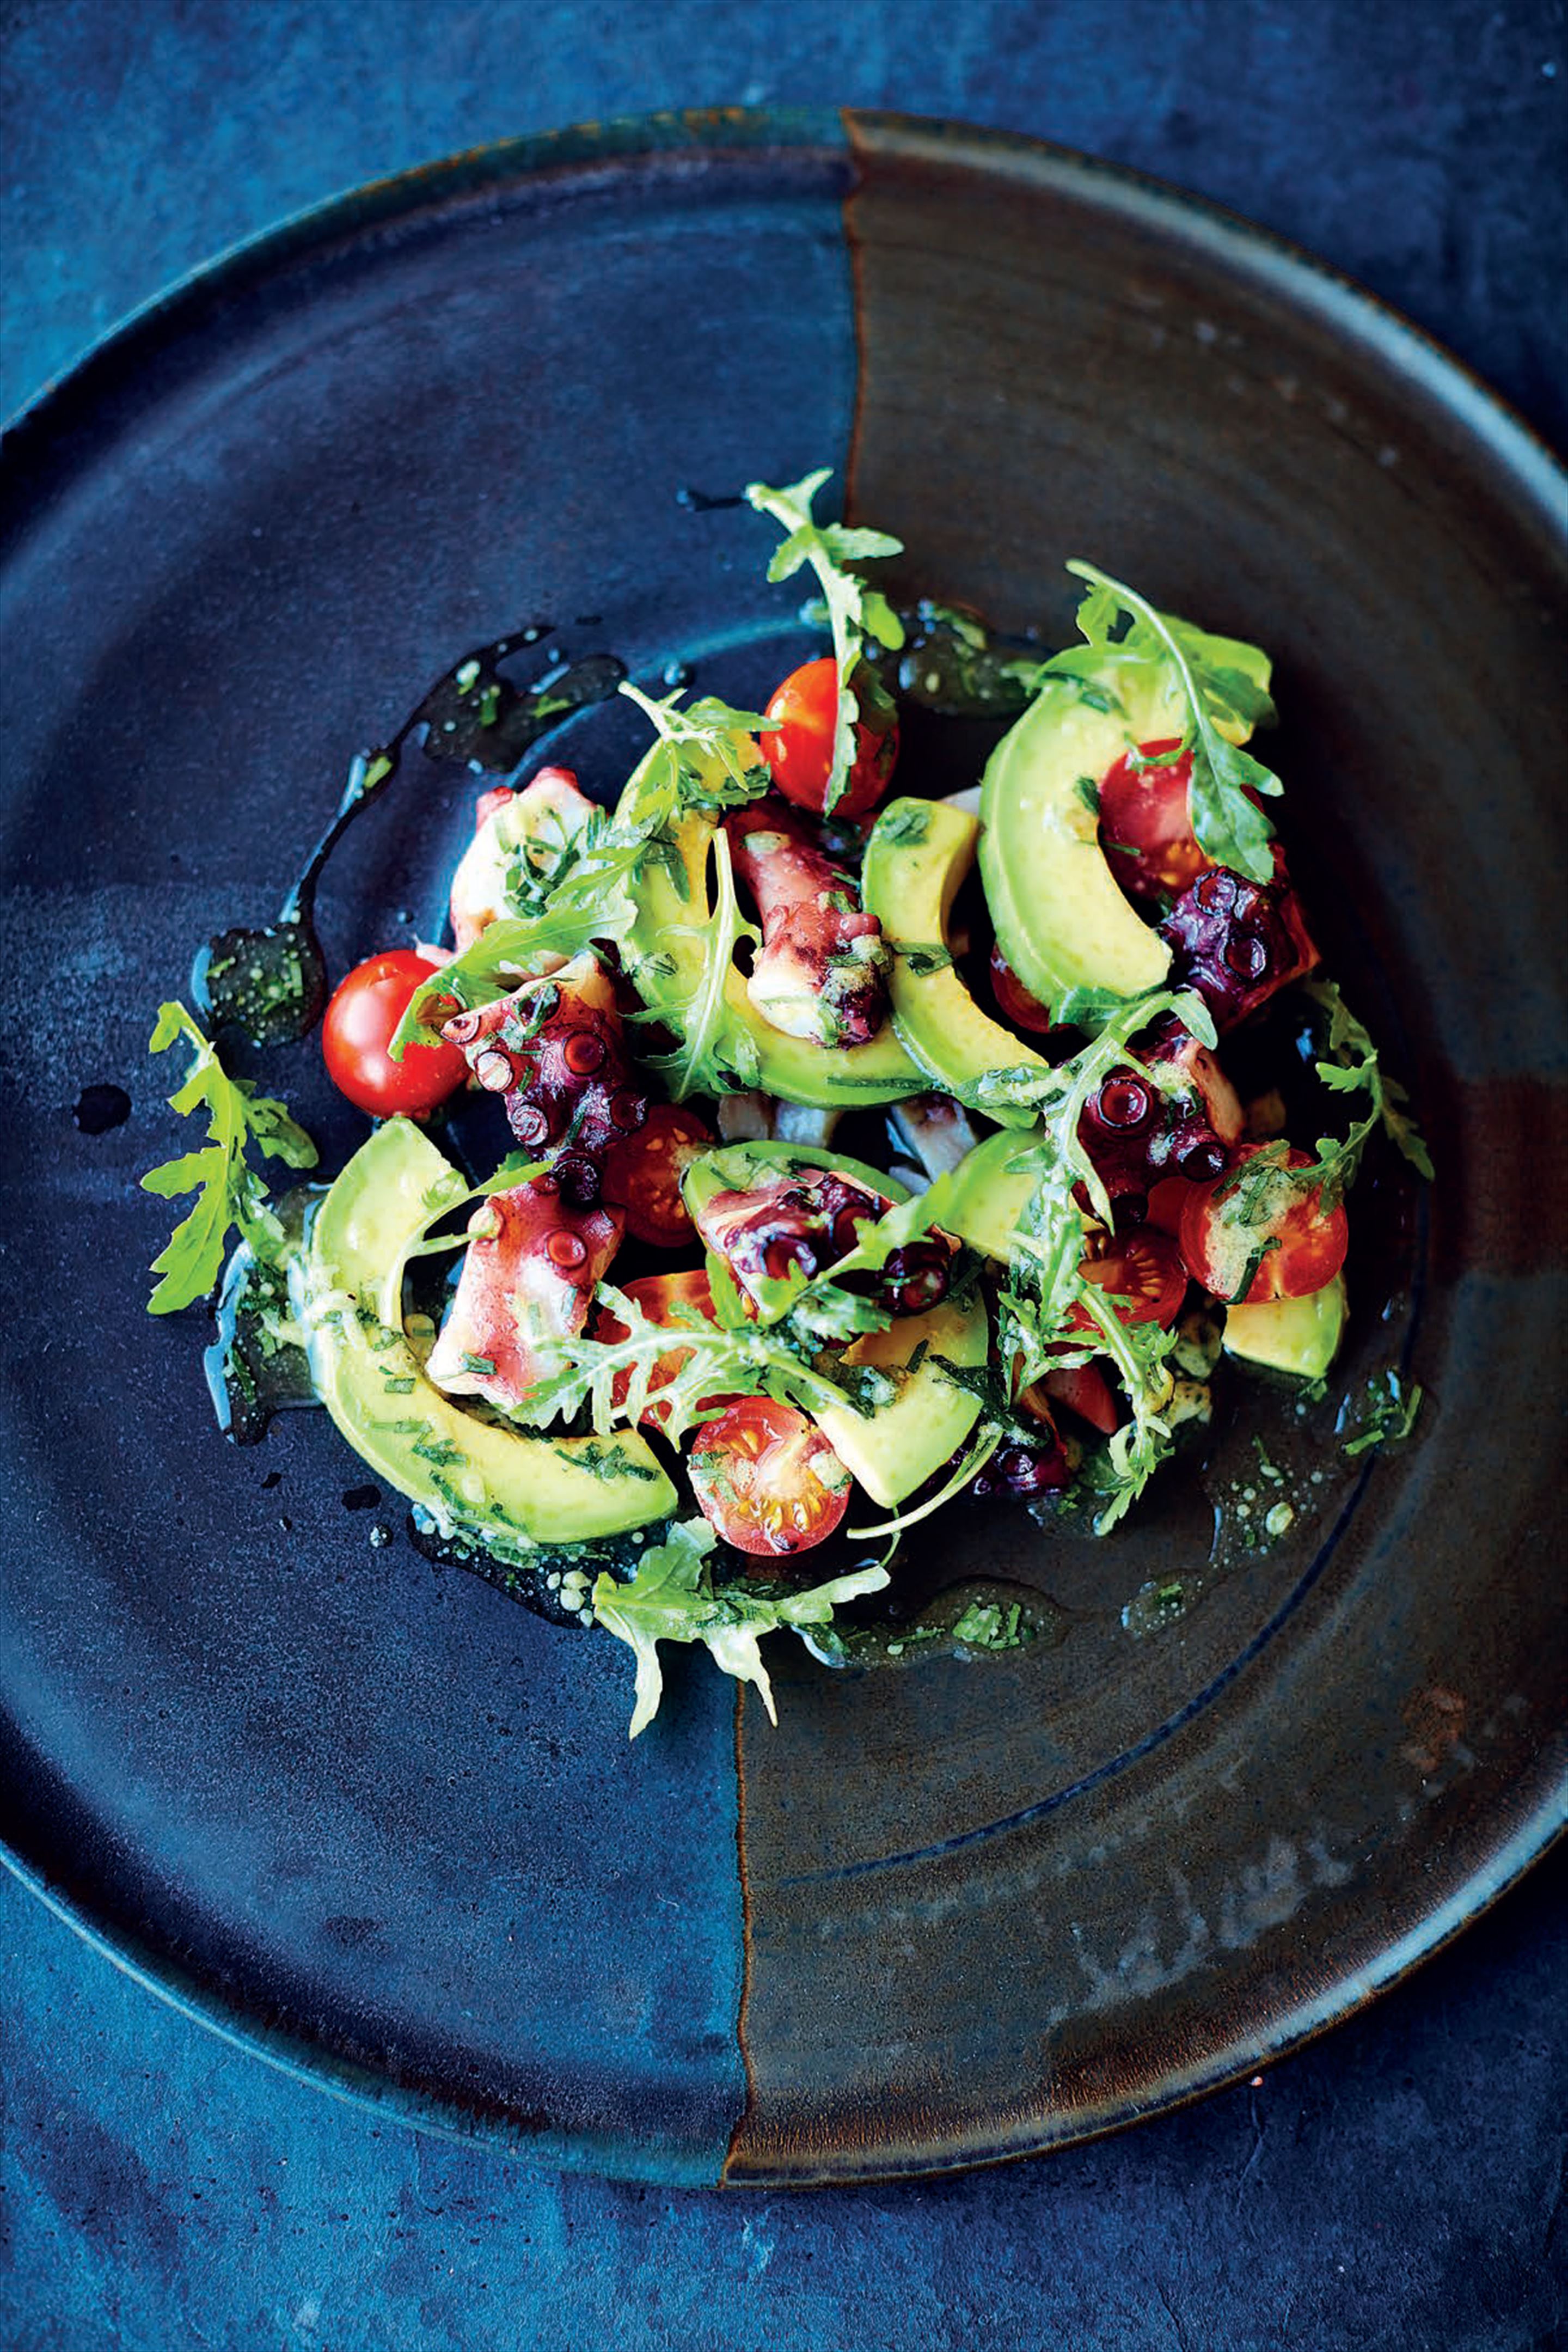 Octopus, avocado and tomato salad, lime and coriander dressing